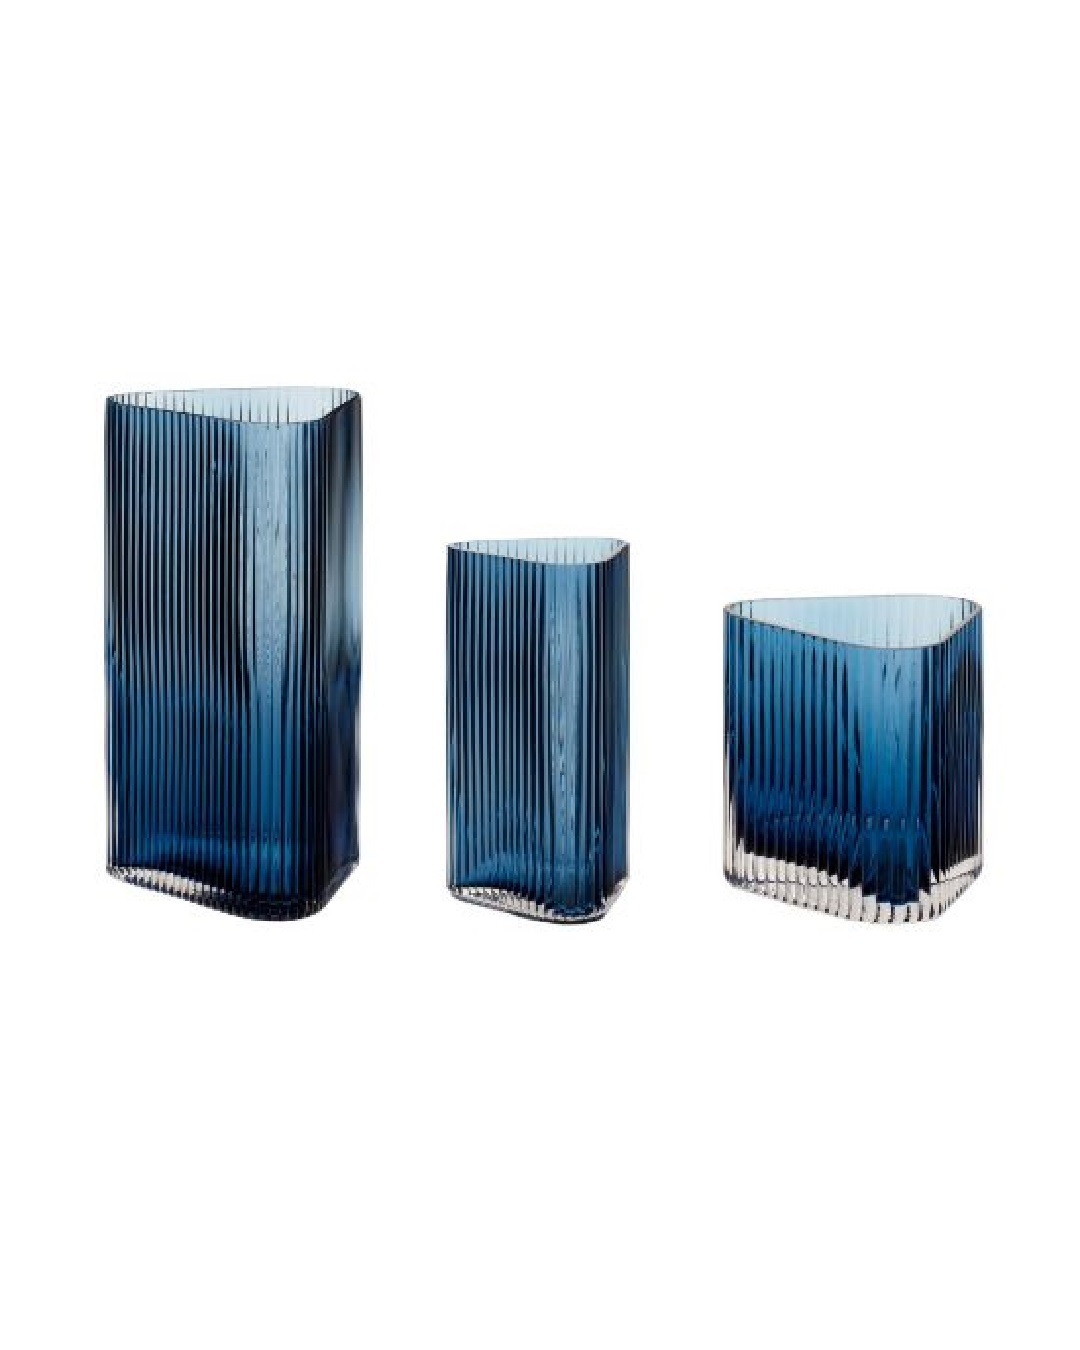 Triangle blue vases in 3 sizes